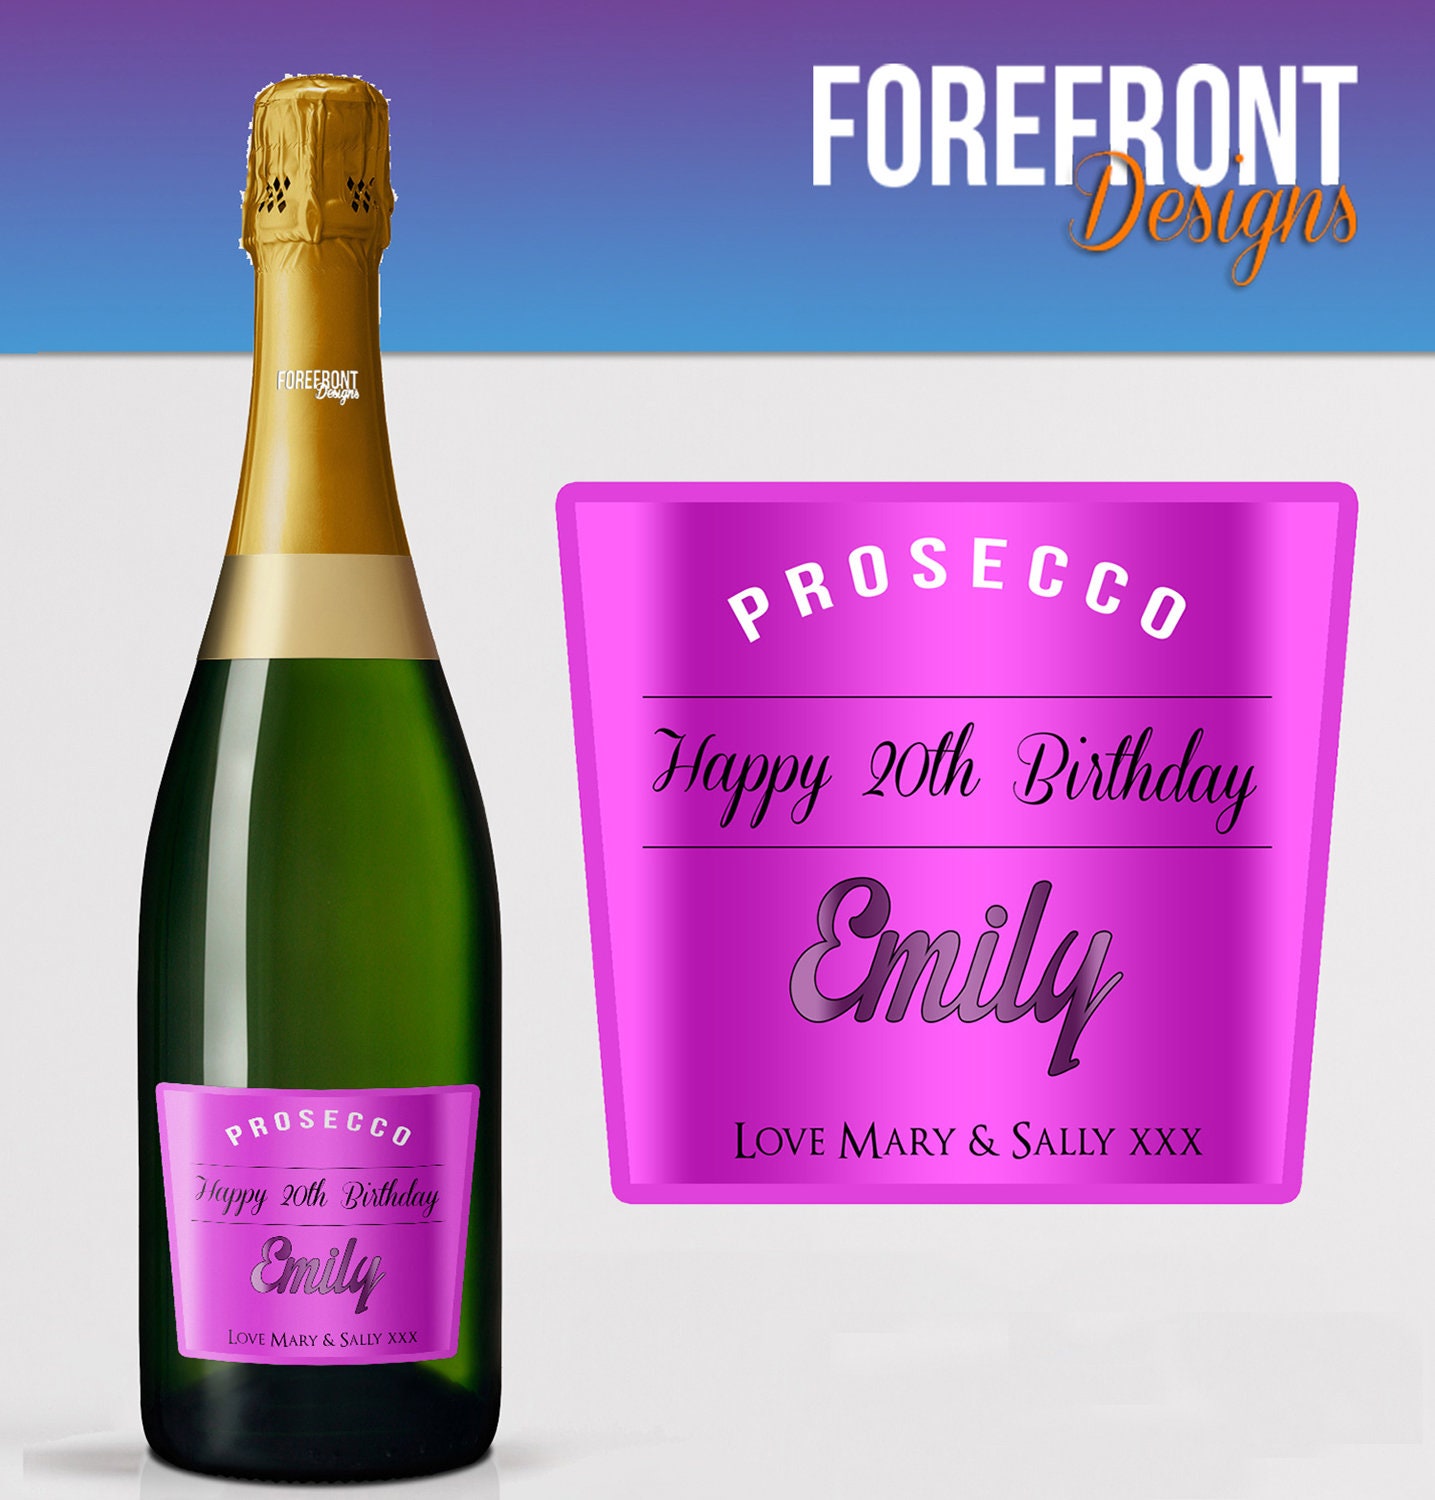 PERSONALISED CHAMPAGNE BOTTLE LABEL BIRTHDAY ANY OCCASION GIFT 